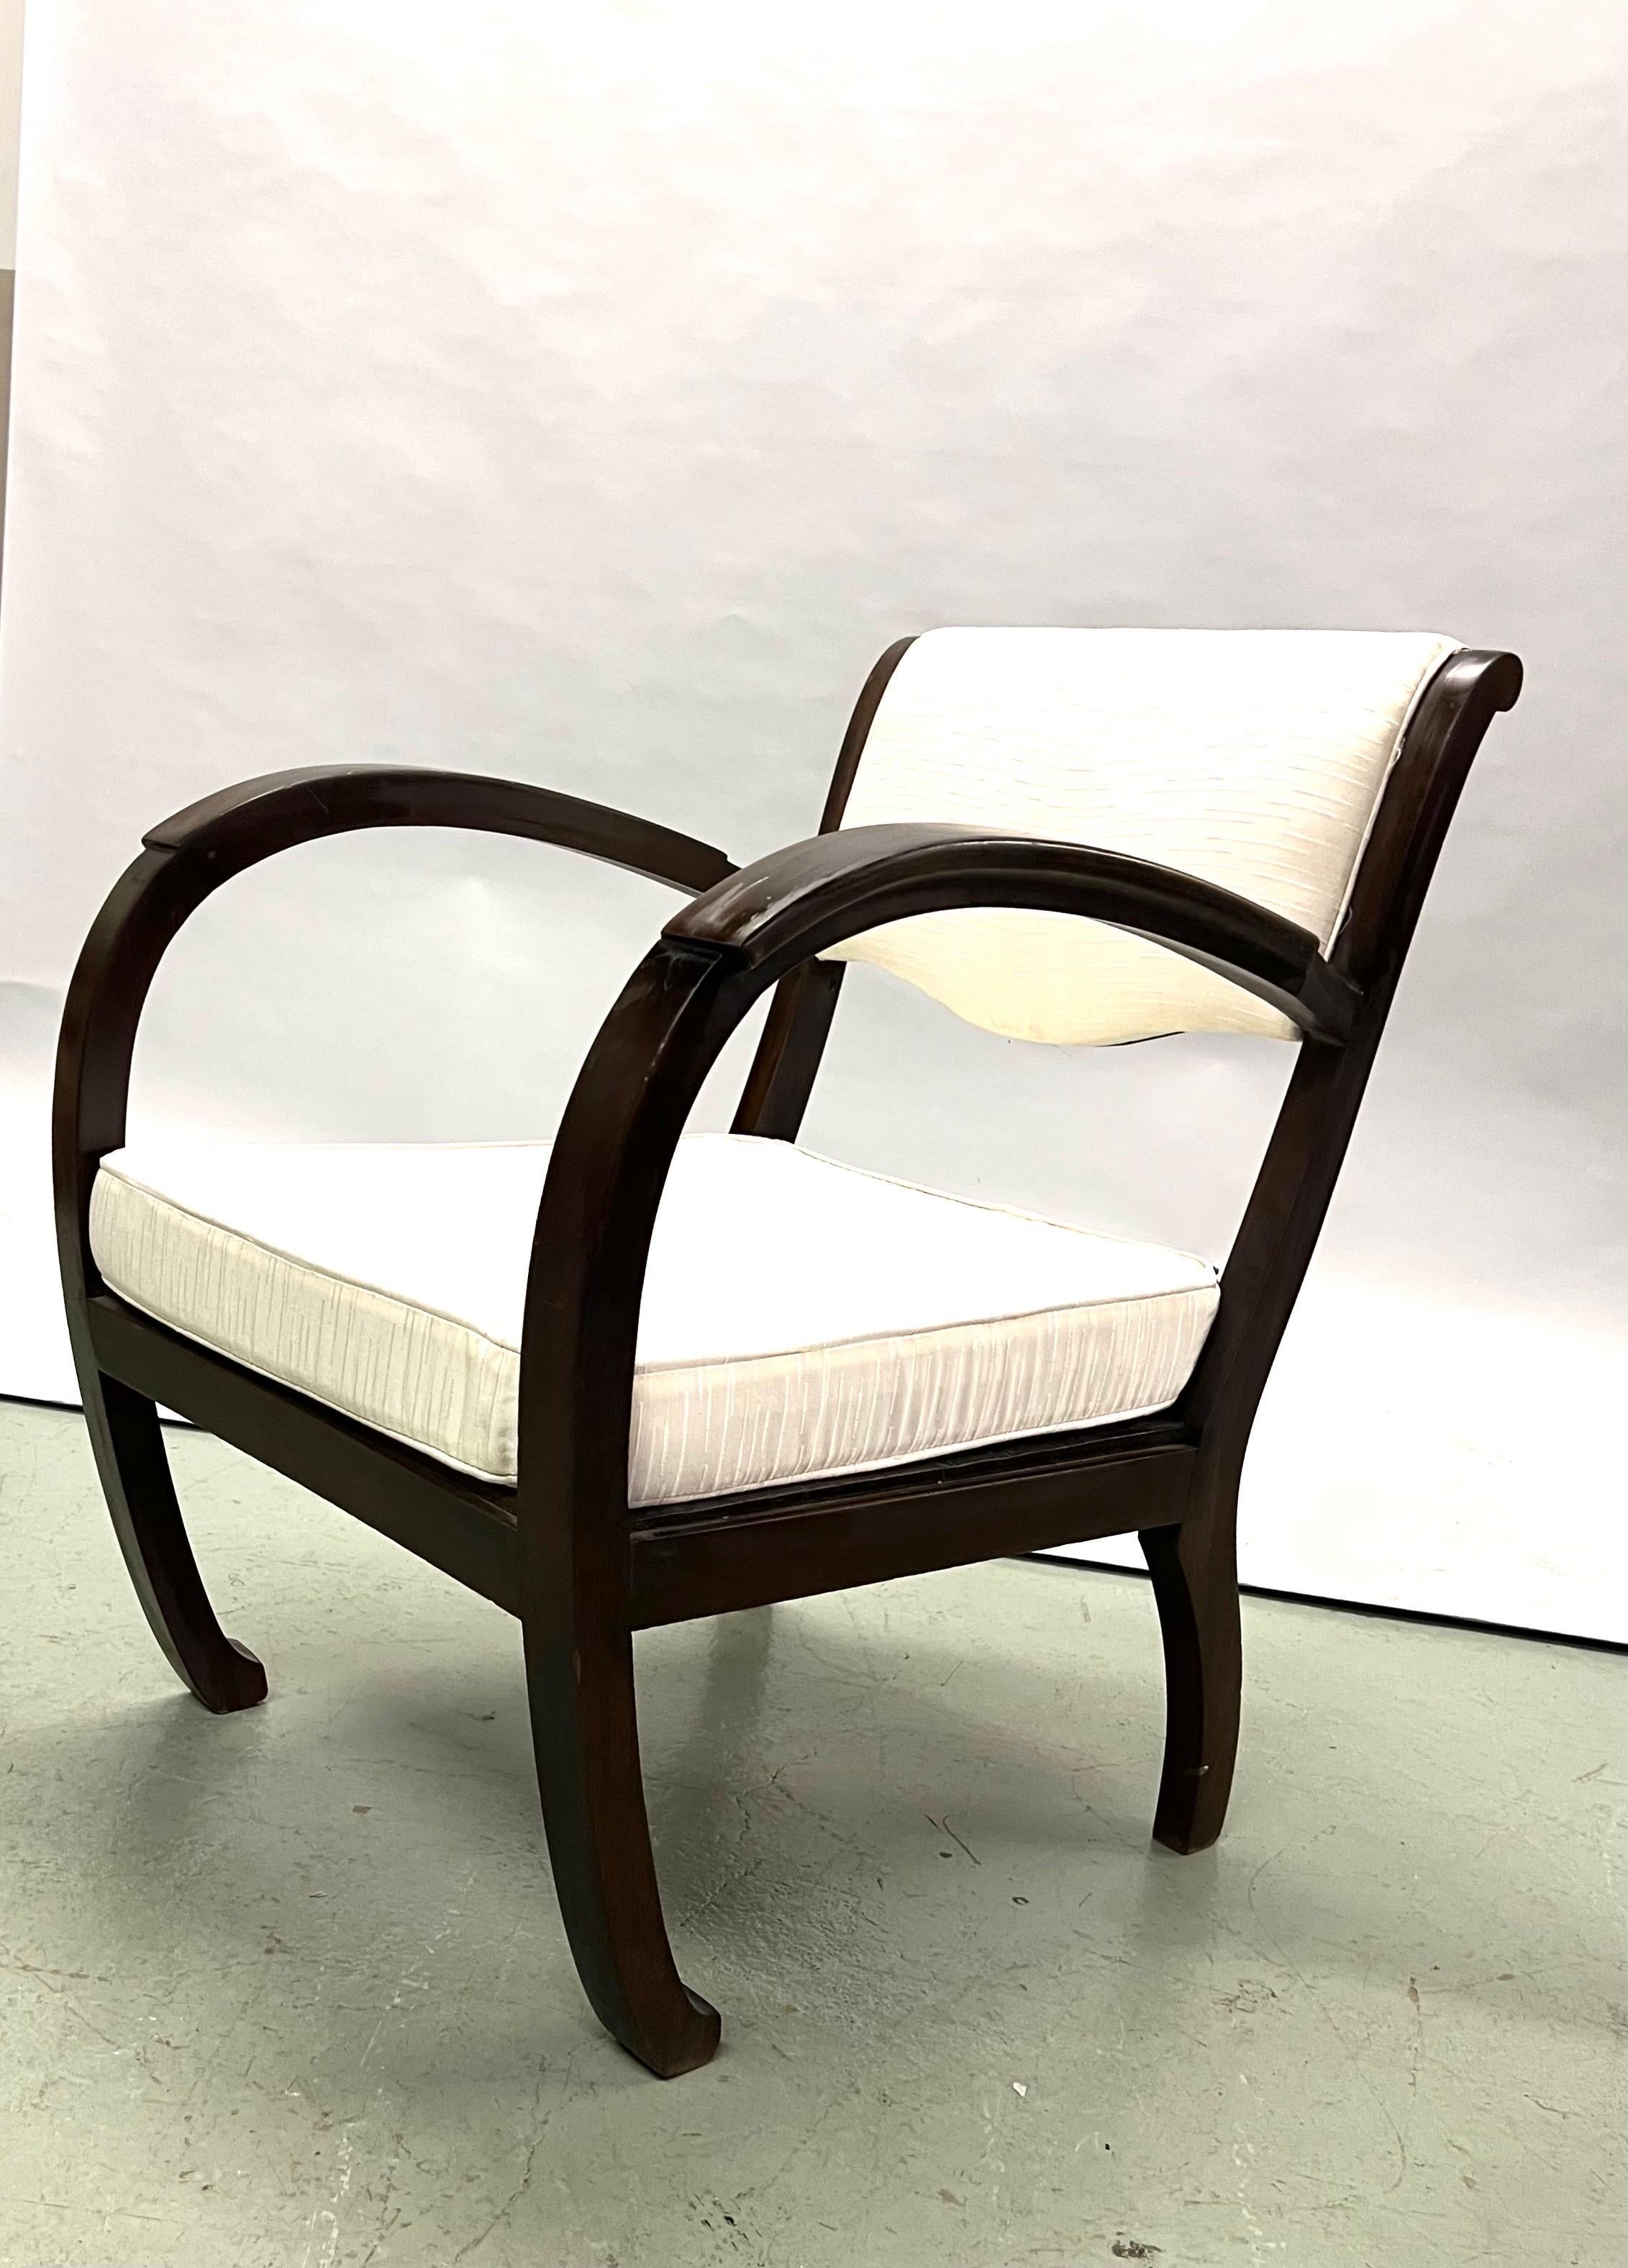 Rare French Art Deco Hand Carved Teak Armchairs/ Lounge Chairs, 1920-30 For Sale 1